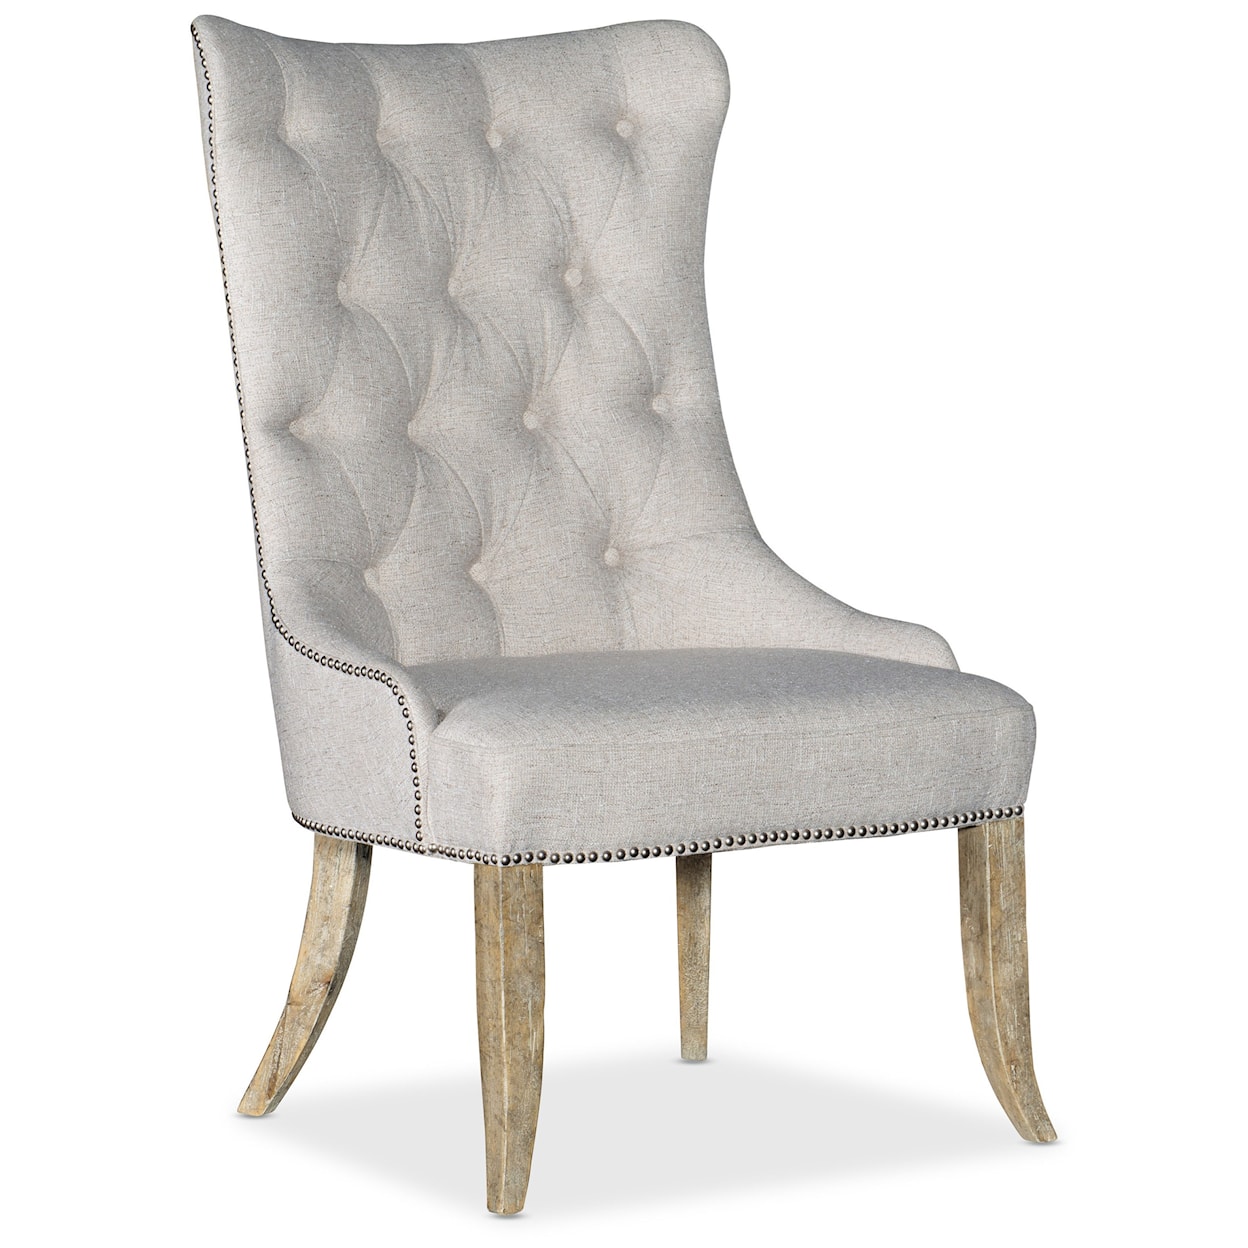 Hooker Furniture Castella Tufted Dining Chair  